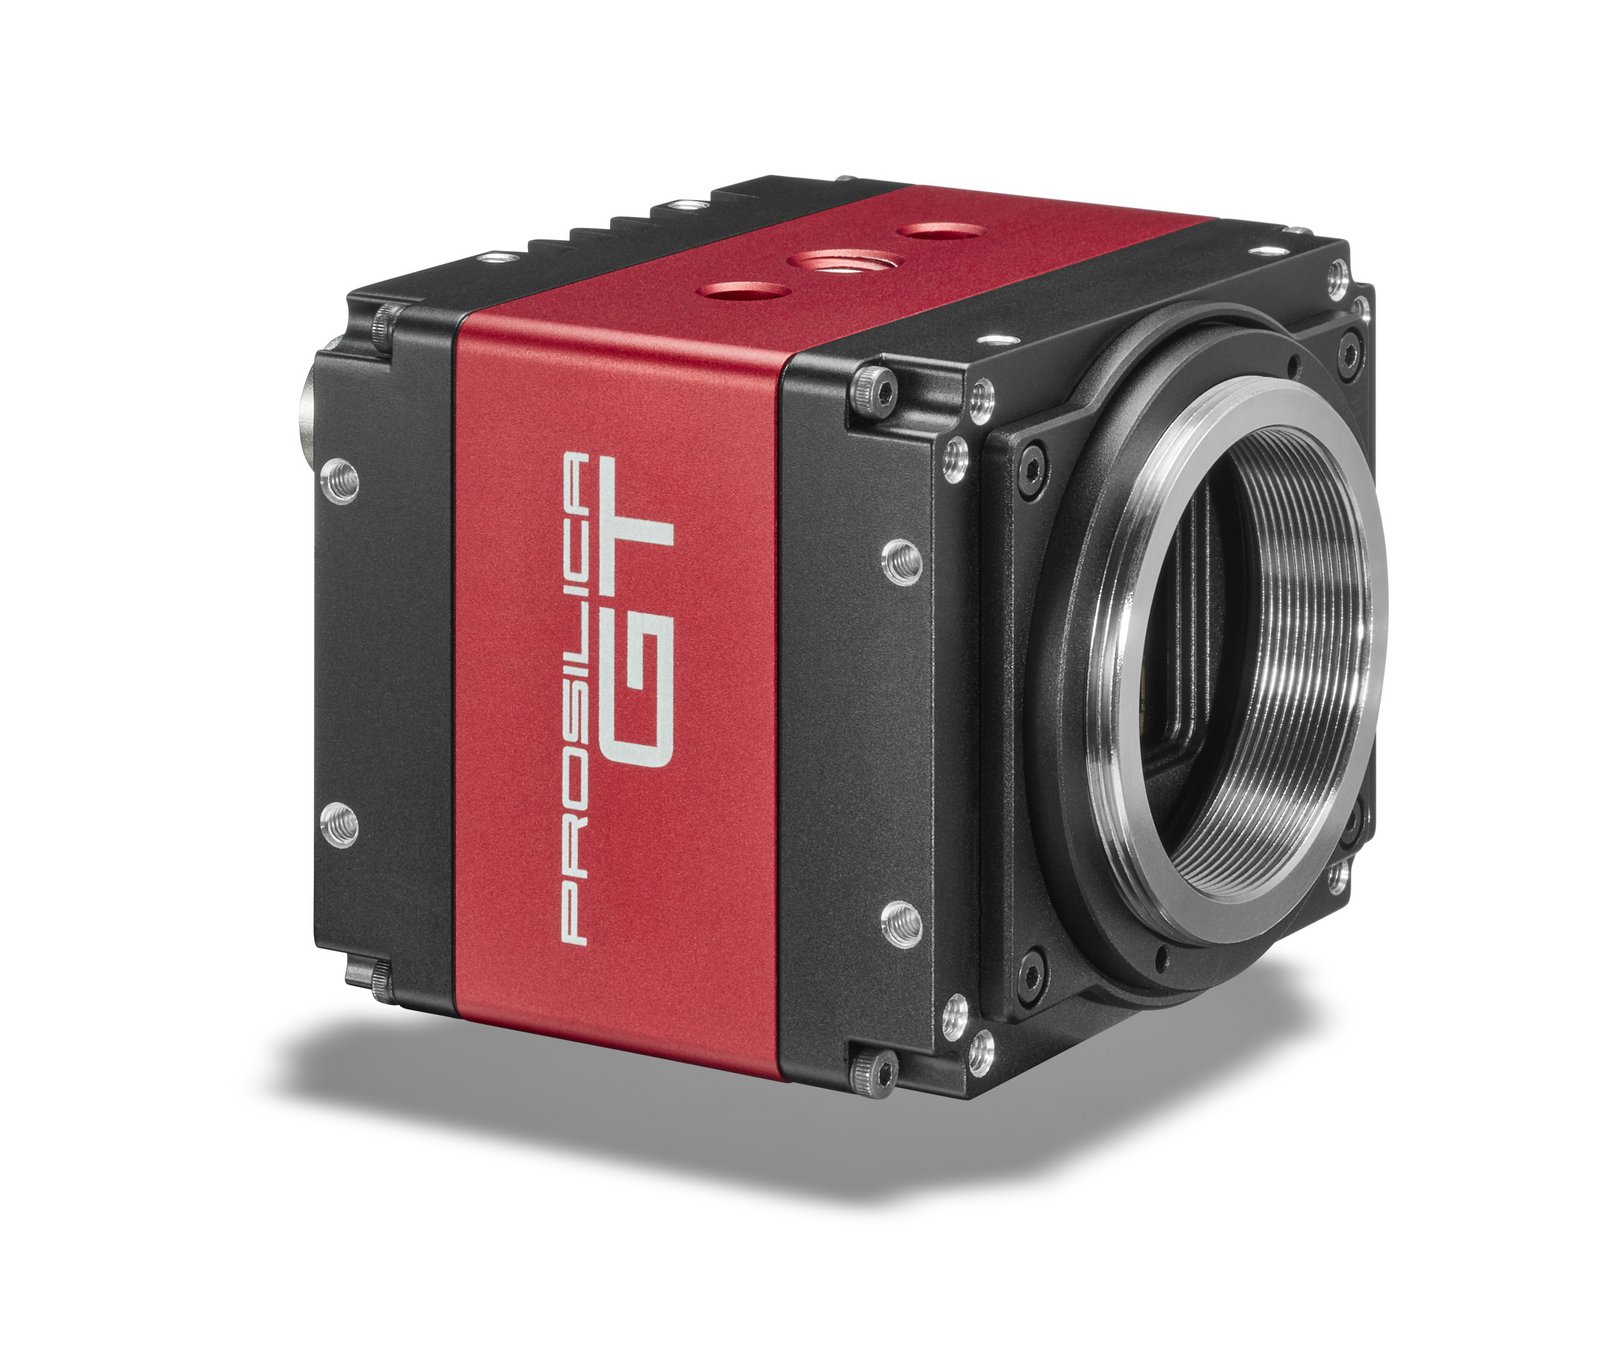 New high-resolution Prosilica GT cameras with TFL-Mount